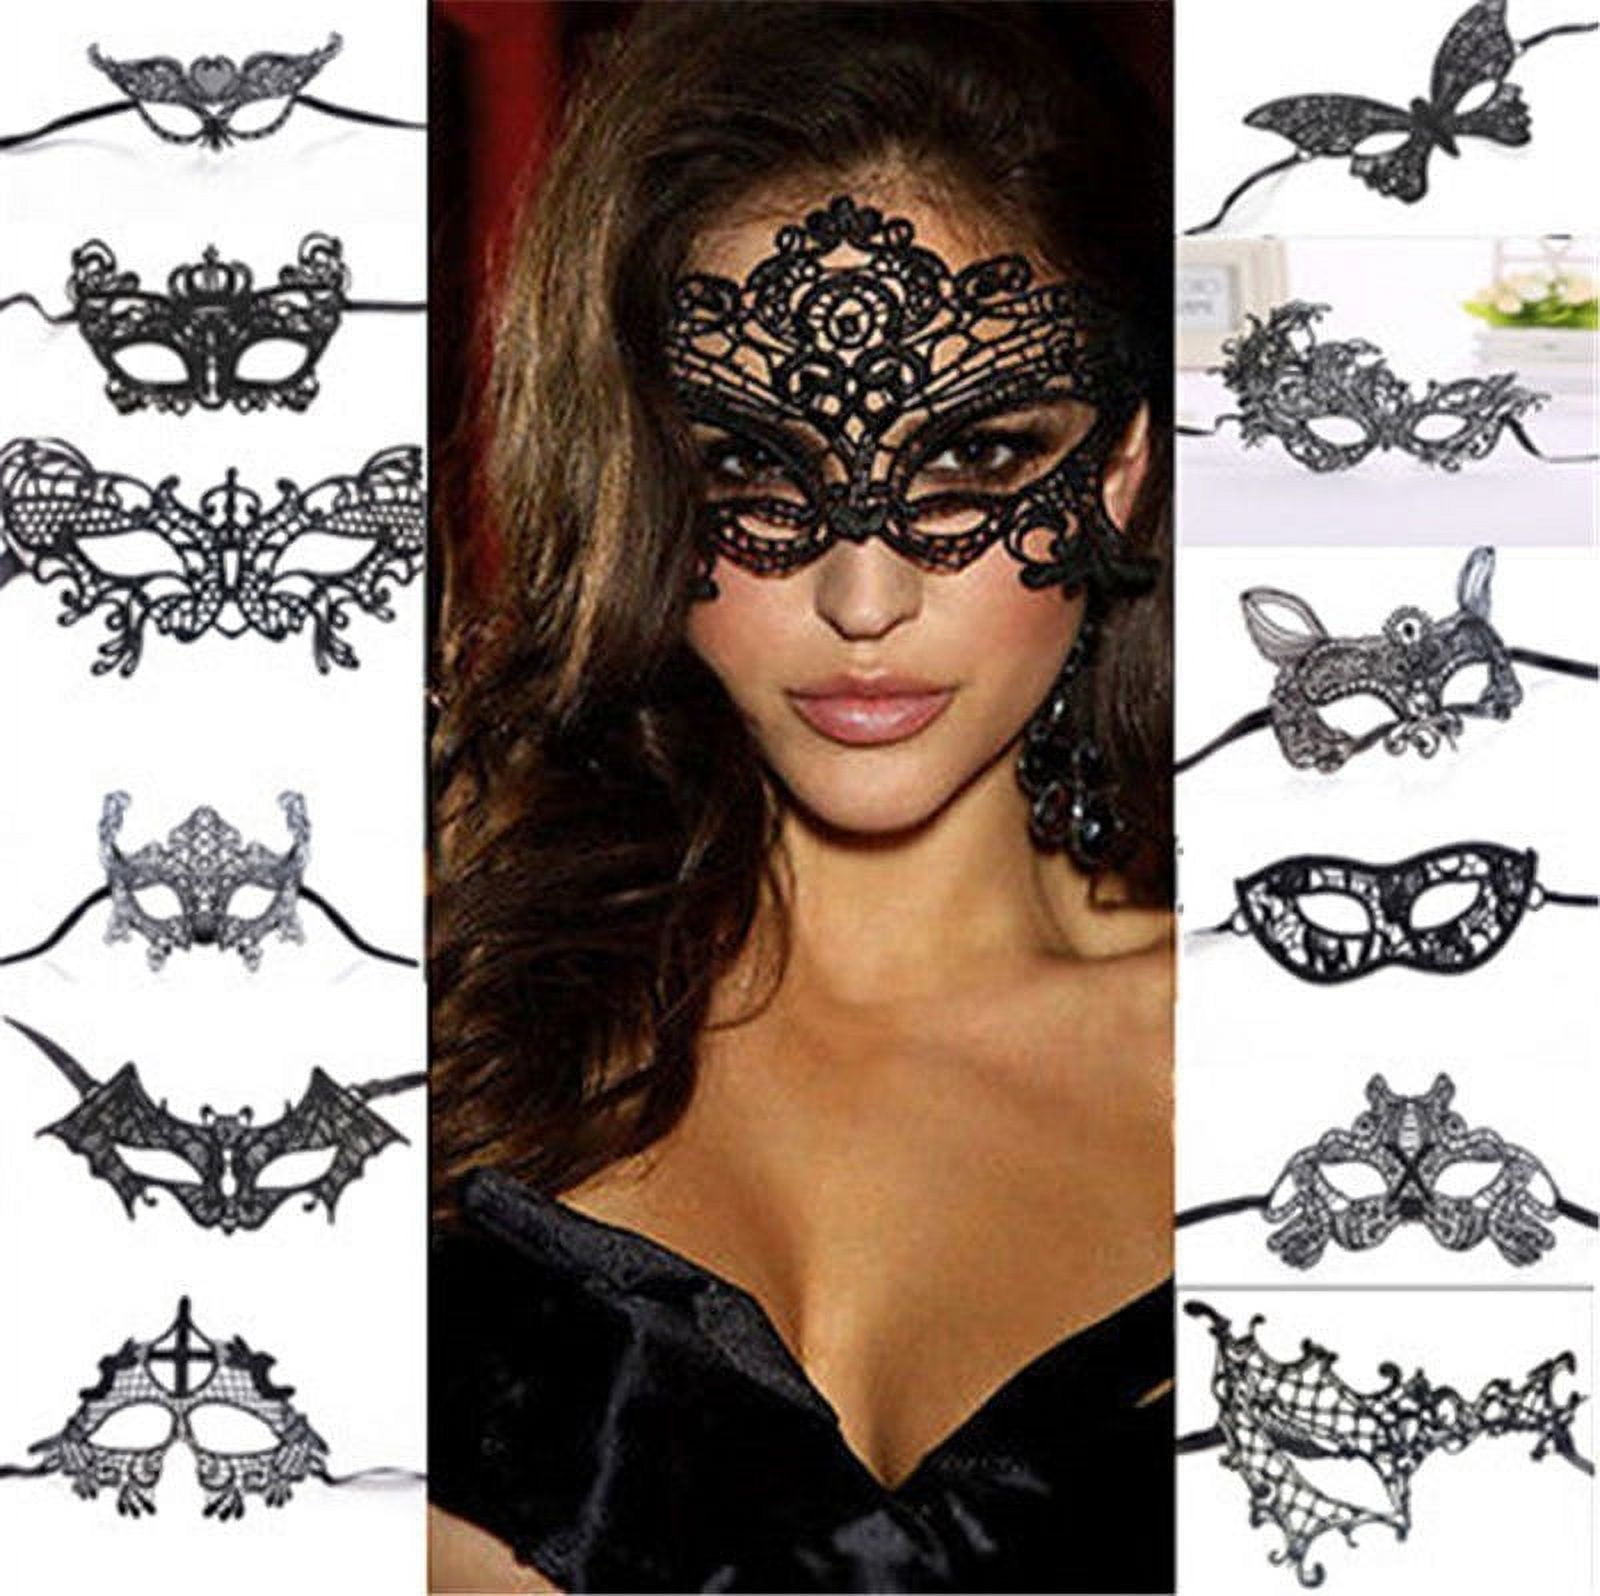 Lace Masquerade Mask for Women, Sexy Lace Mask for Masquerade Party Prom  Ball Dance Halloween Mardi Gras Cosplay Accesorry